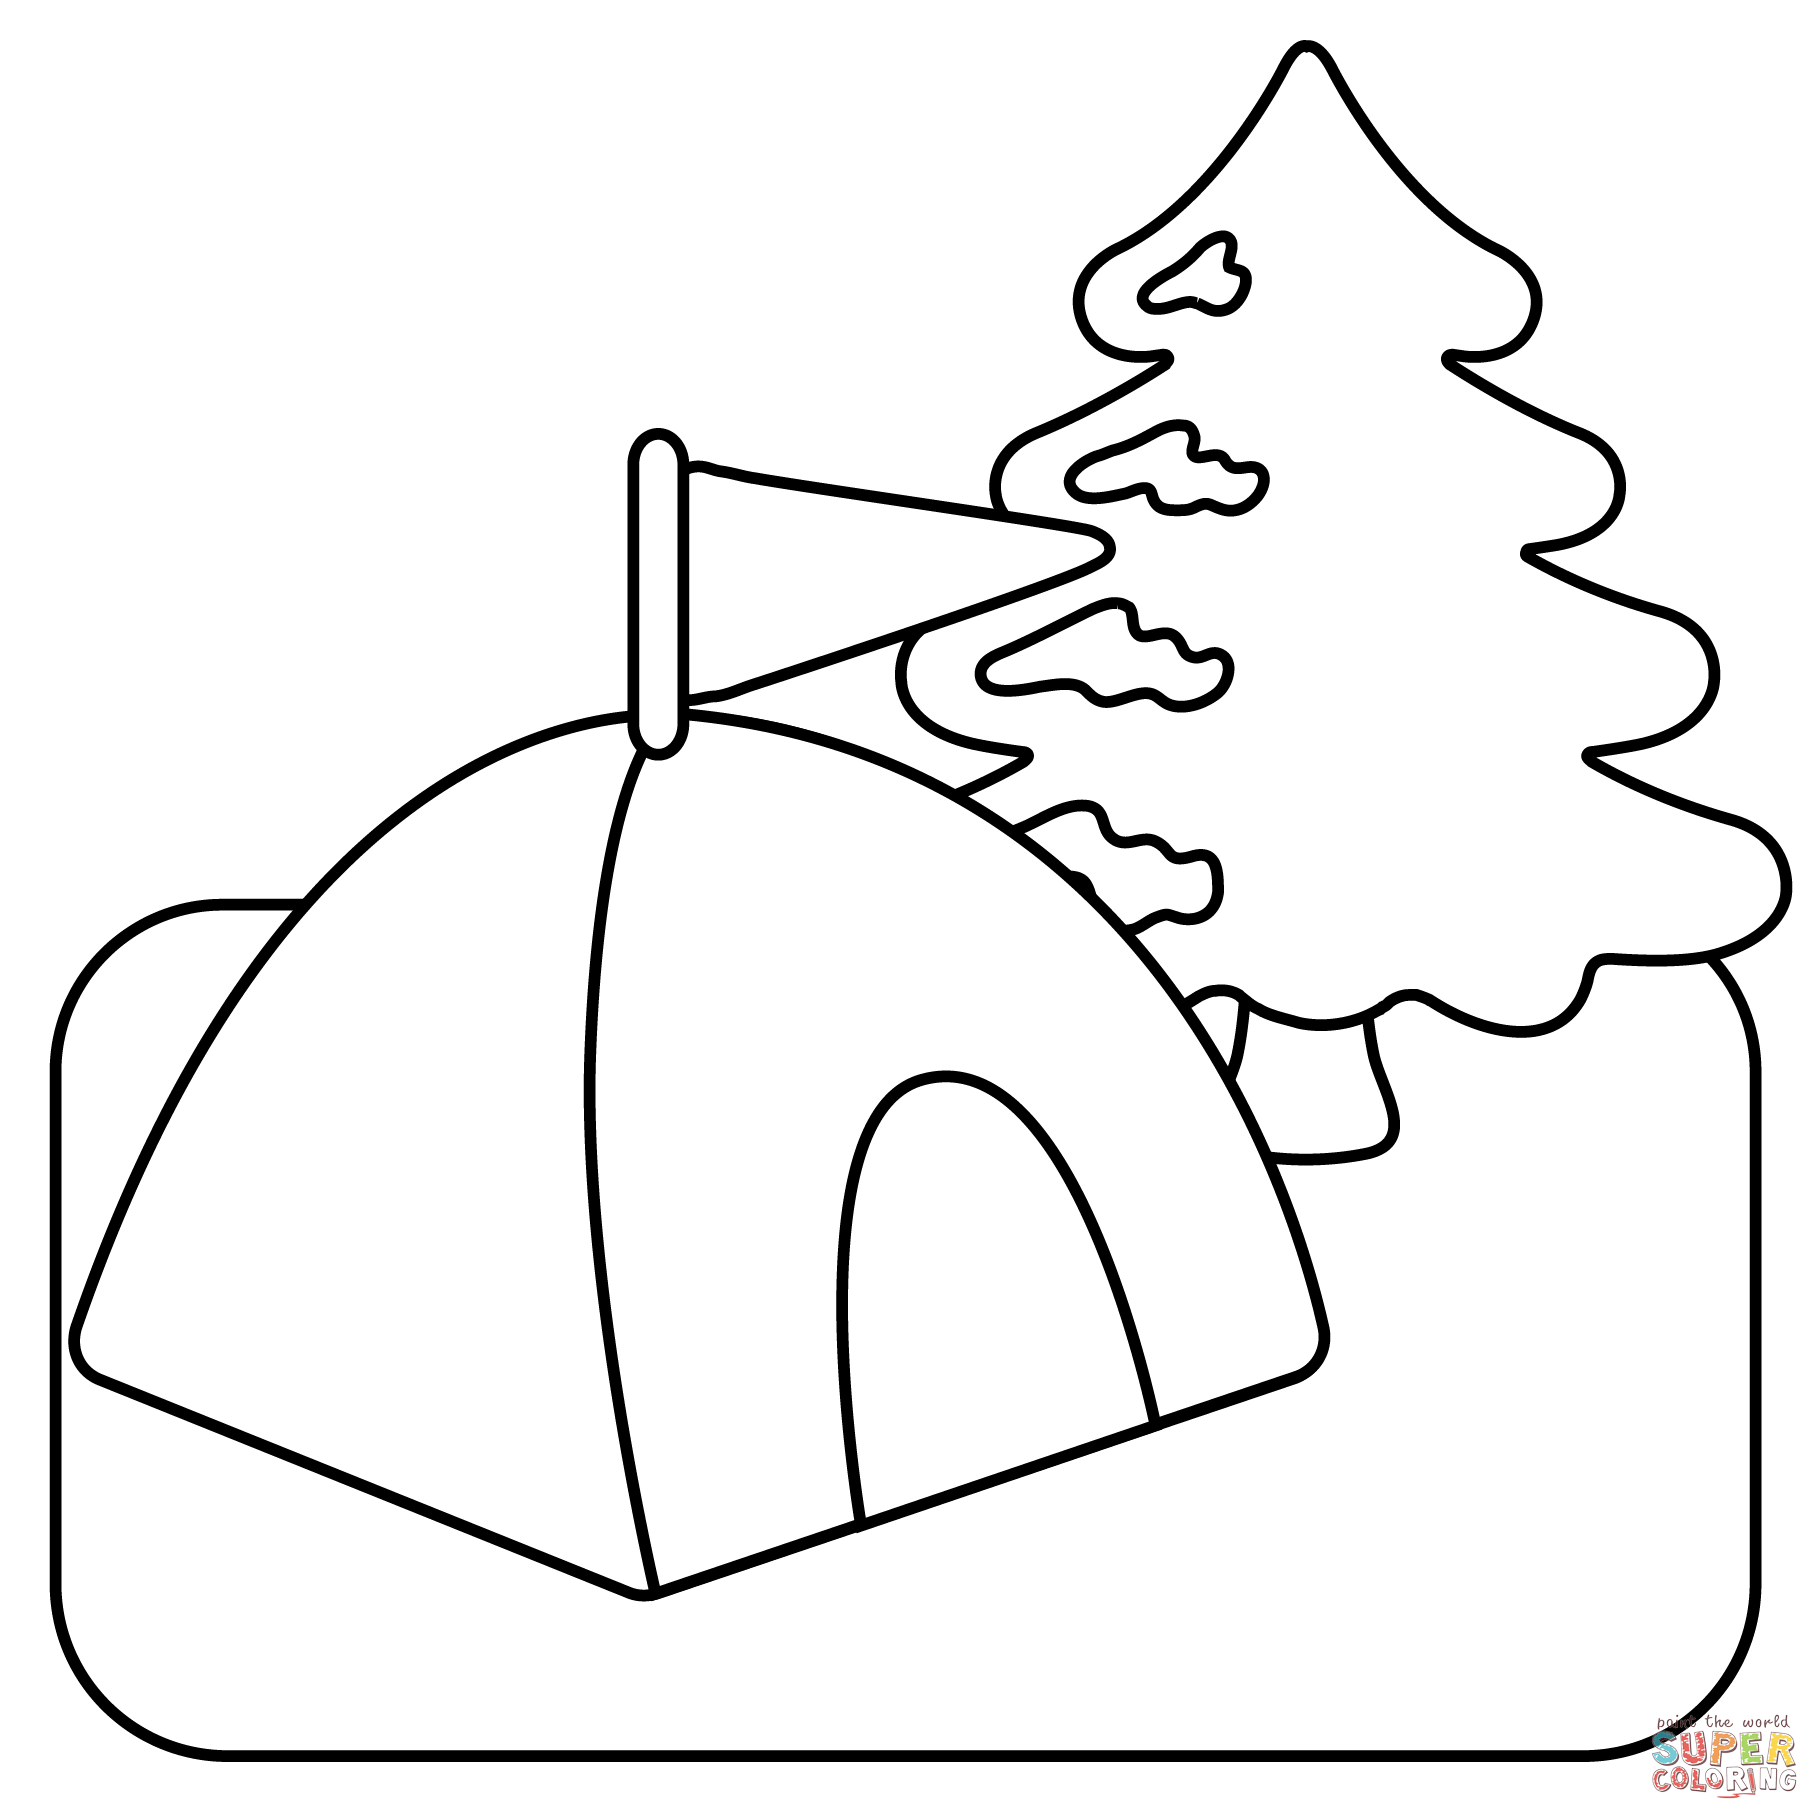 Camping emoji coloring page free printable coloring pages